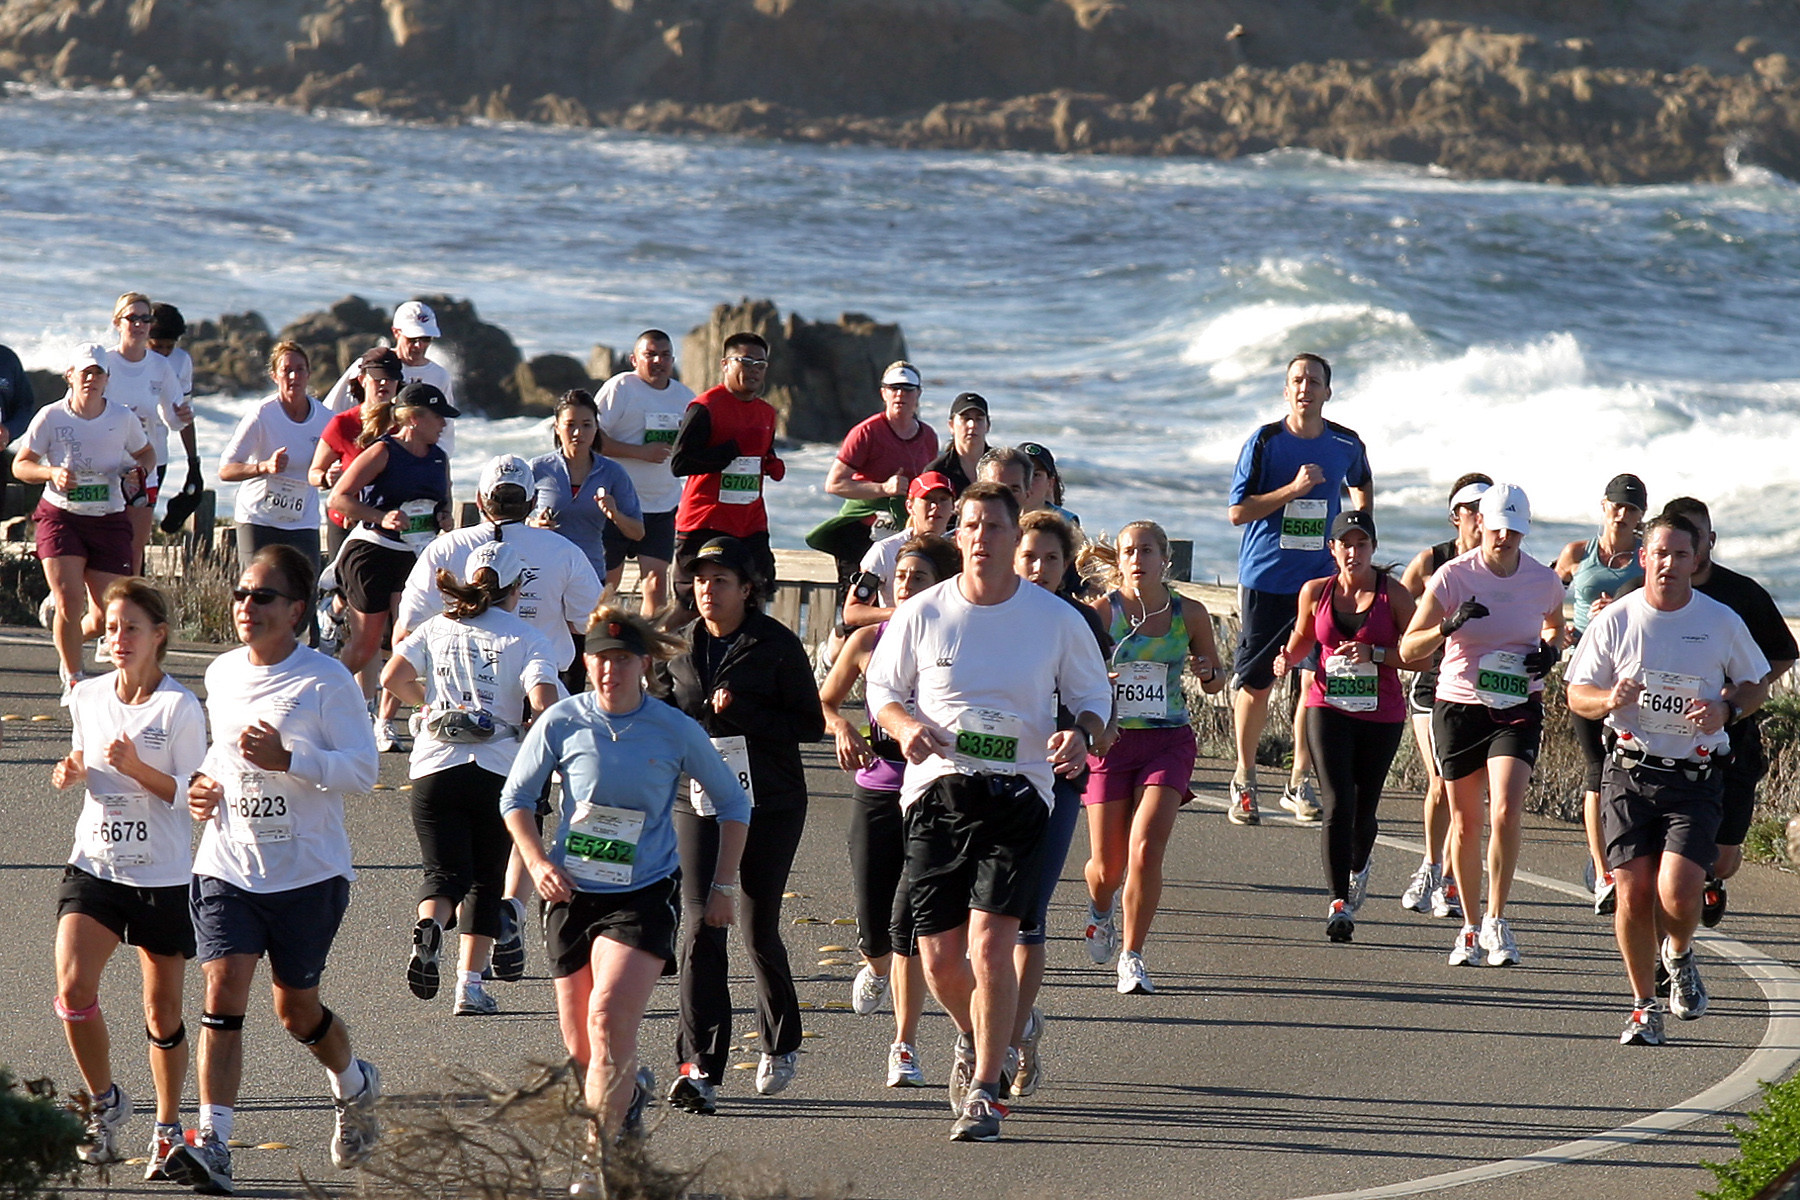 After last yearâ€™s cancellation, the big news heading into the weekend of the Monterey Bay Half Marathon is that the race is on for Sunday